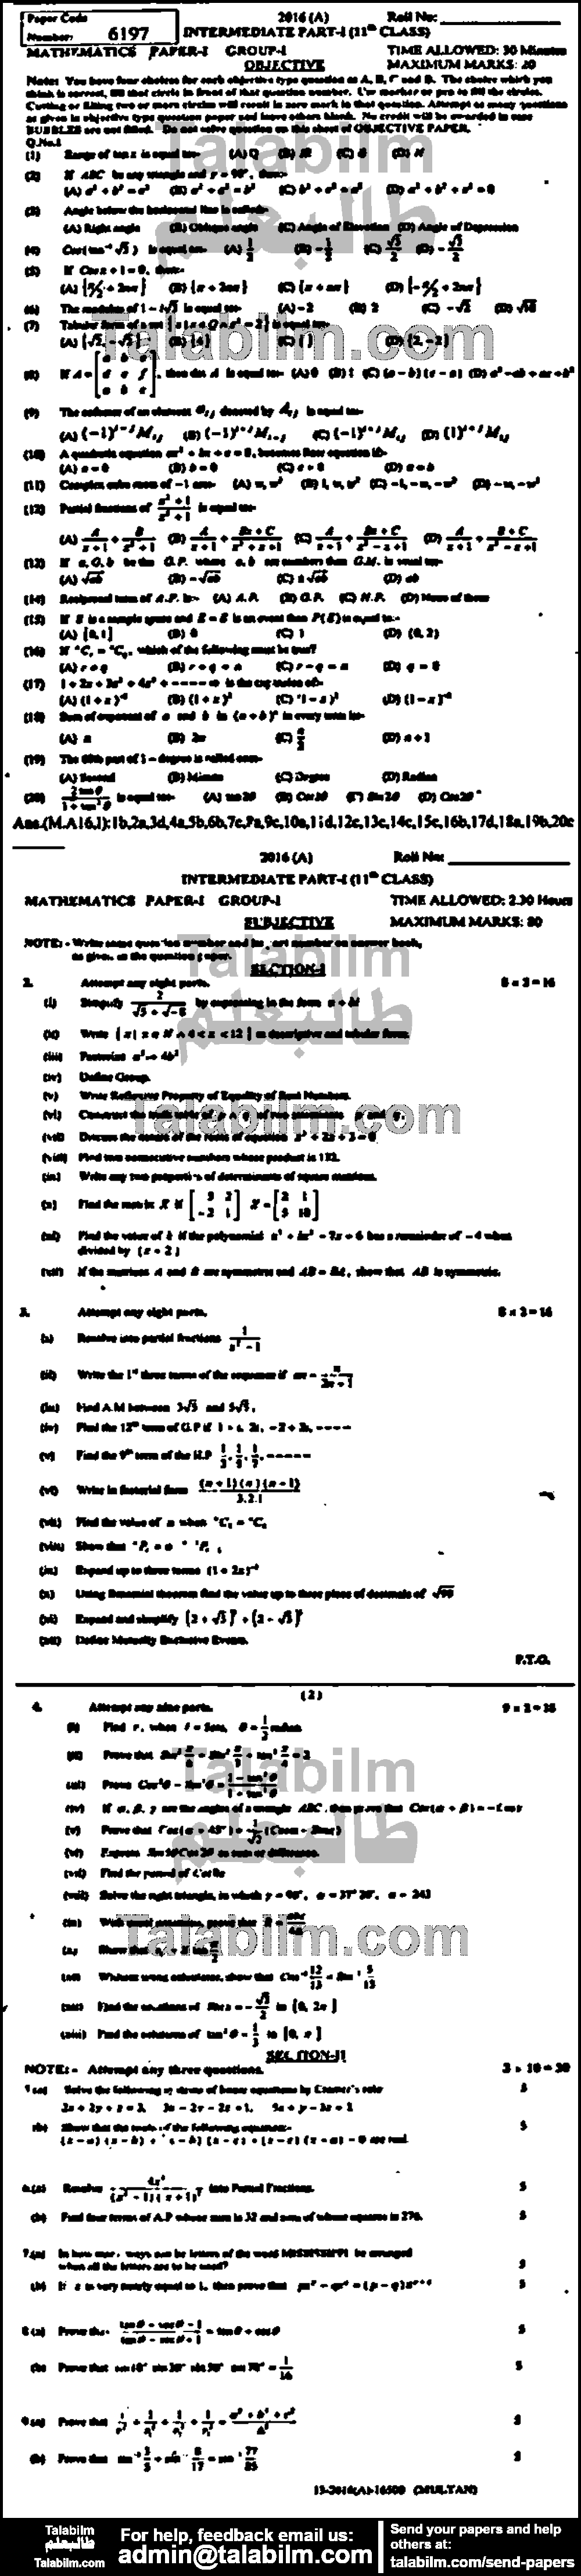 Math 0 past paper for Group-I 2016